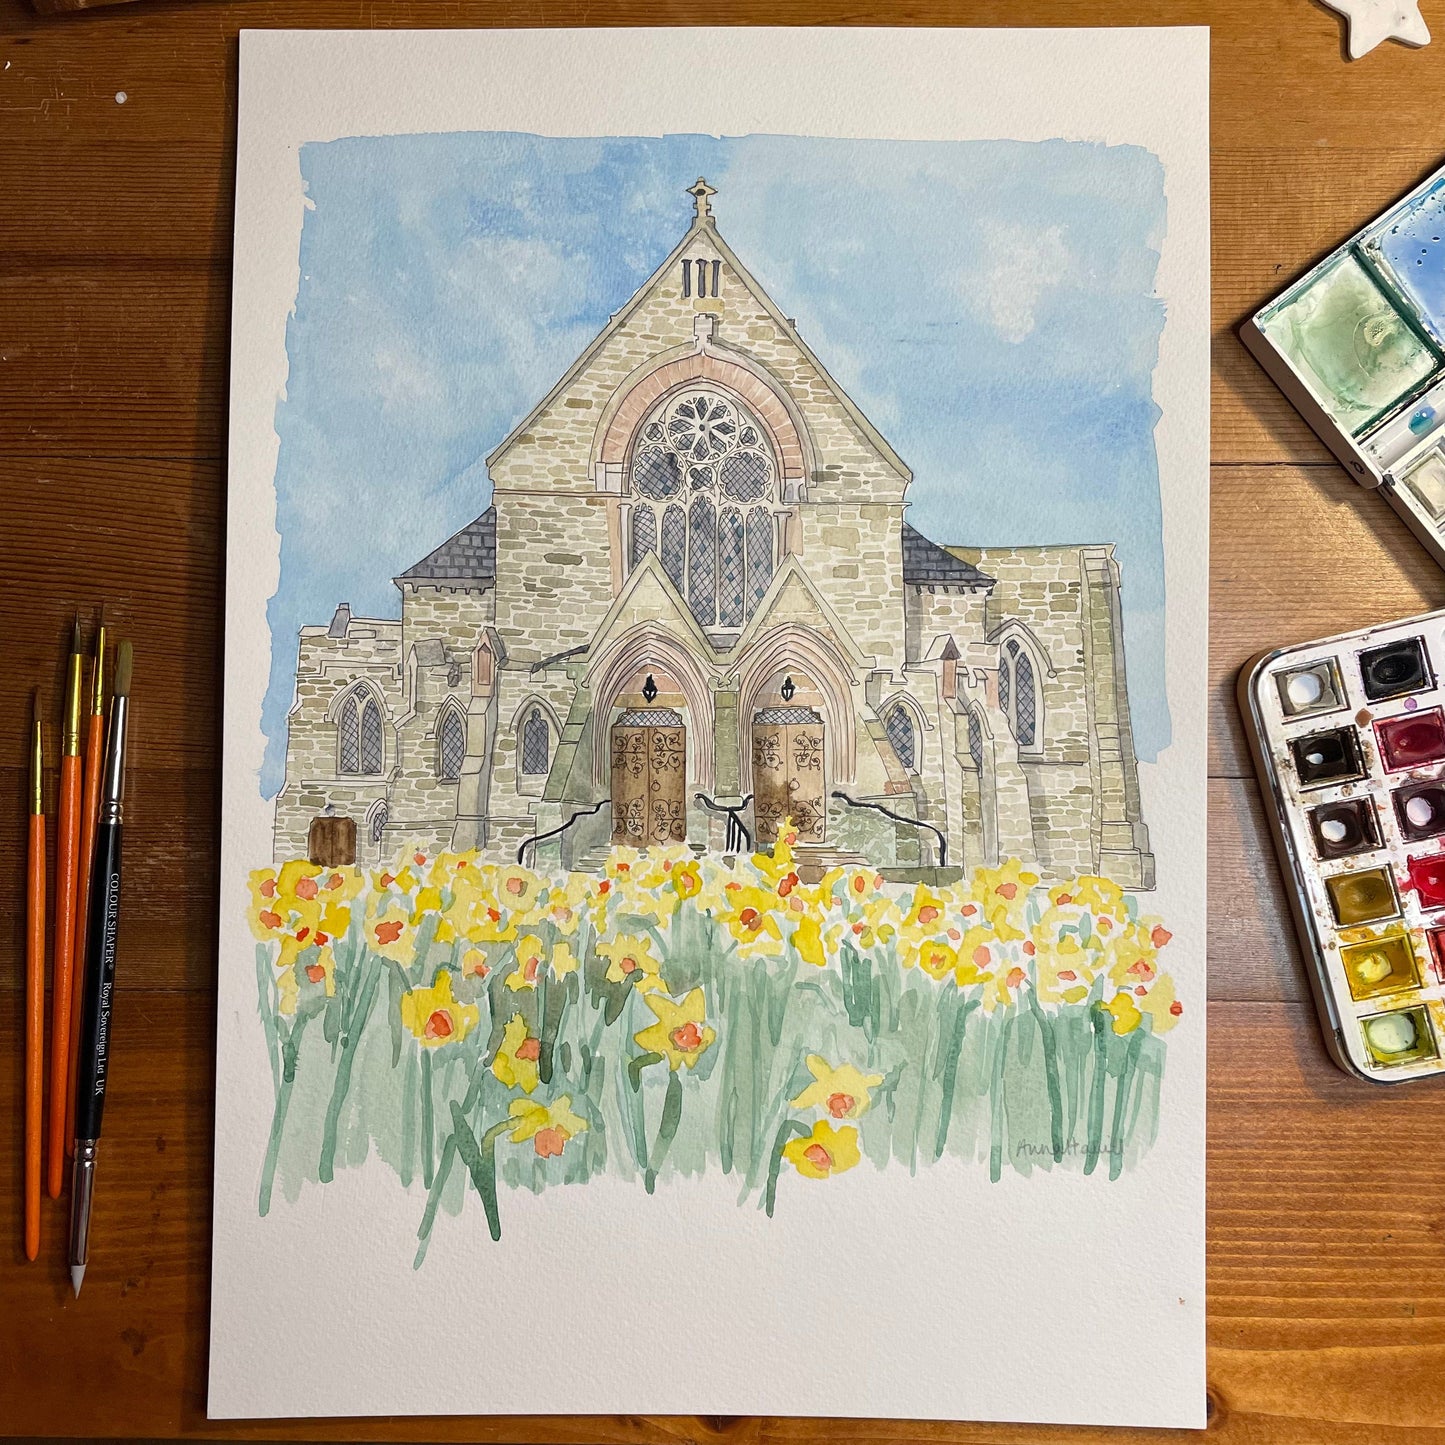 And Hope Designs Commission Custom Watercolour church or wedding venue painting